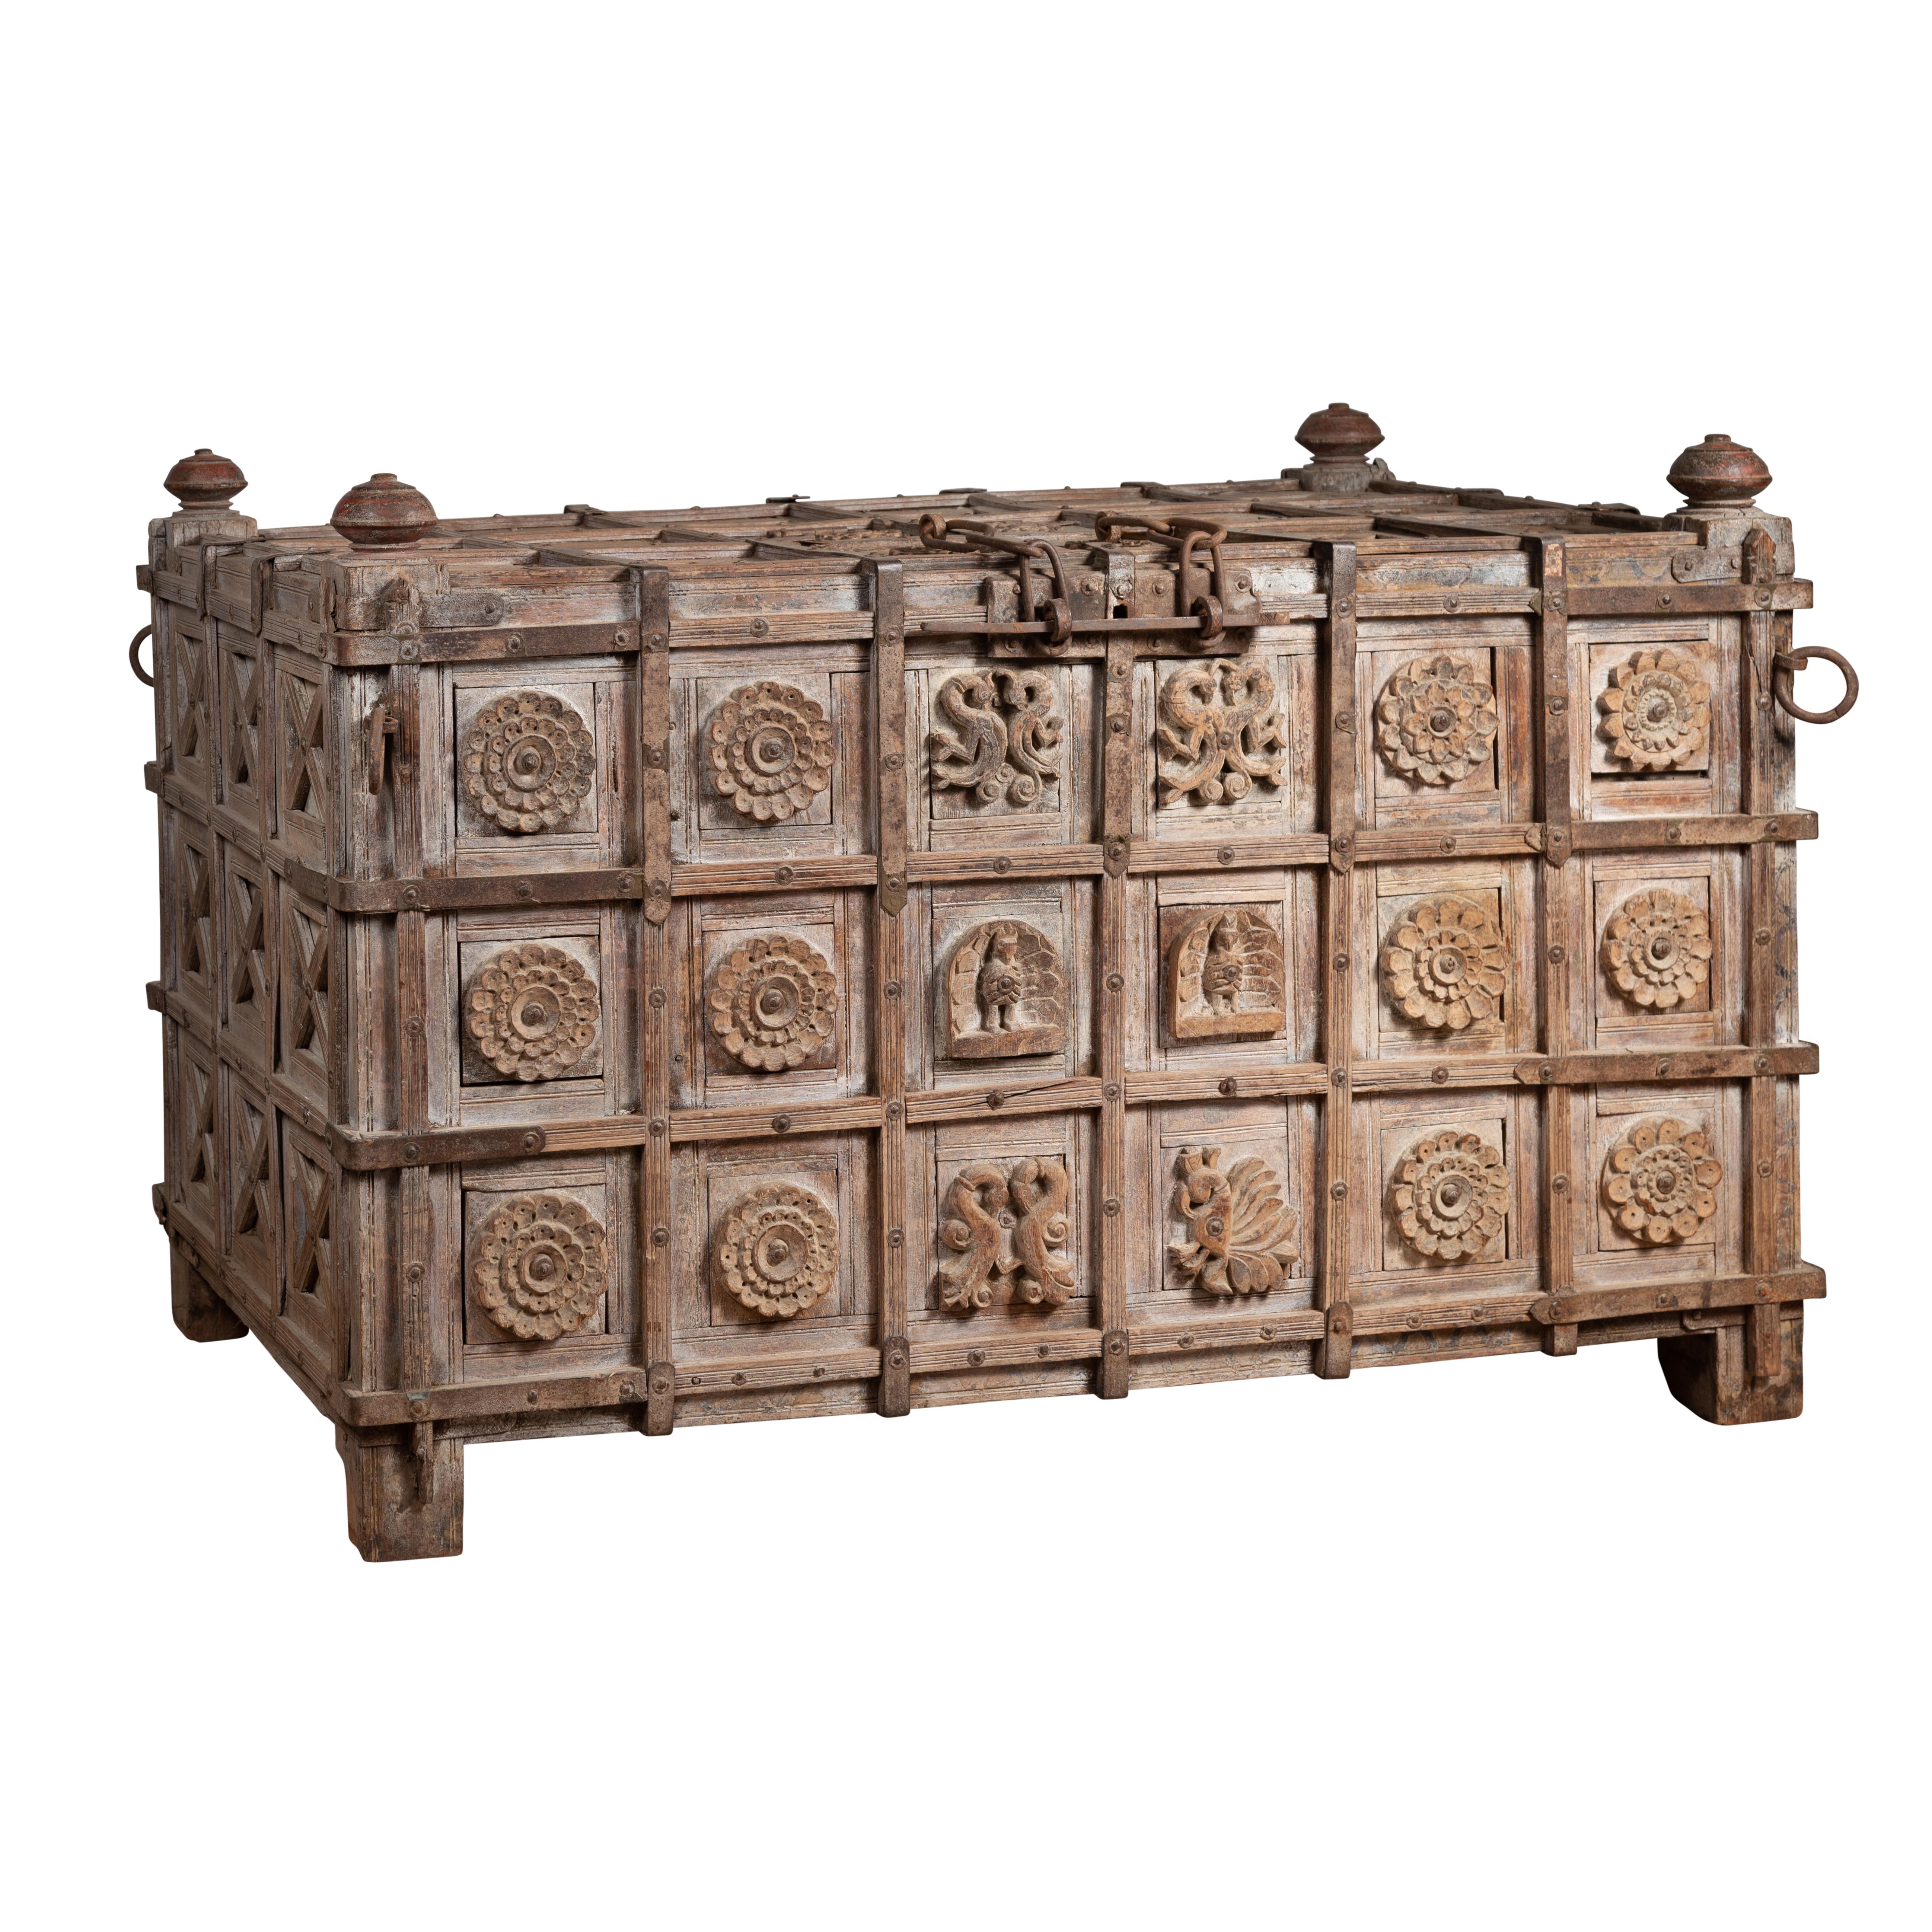 Oversized Indian Treasure Chest with Raised X Patterns, Rosettes and Animals